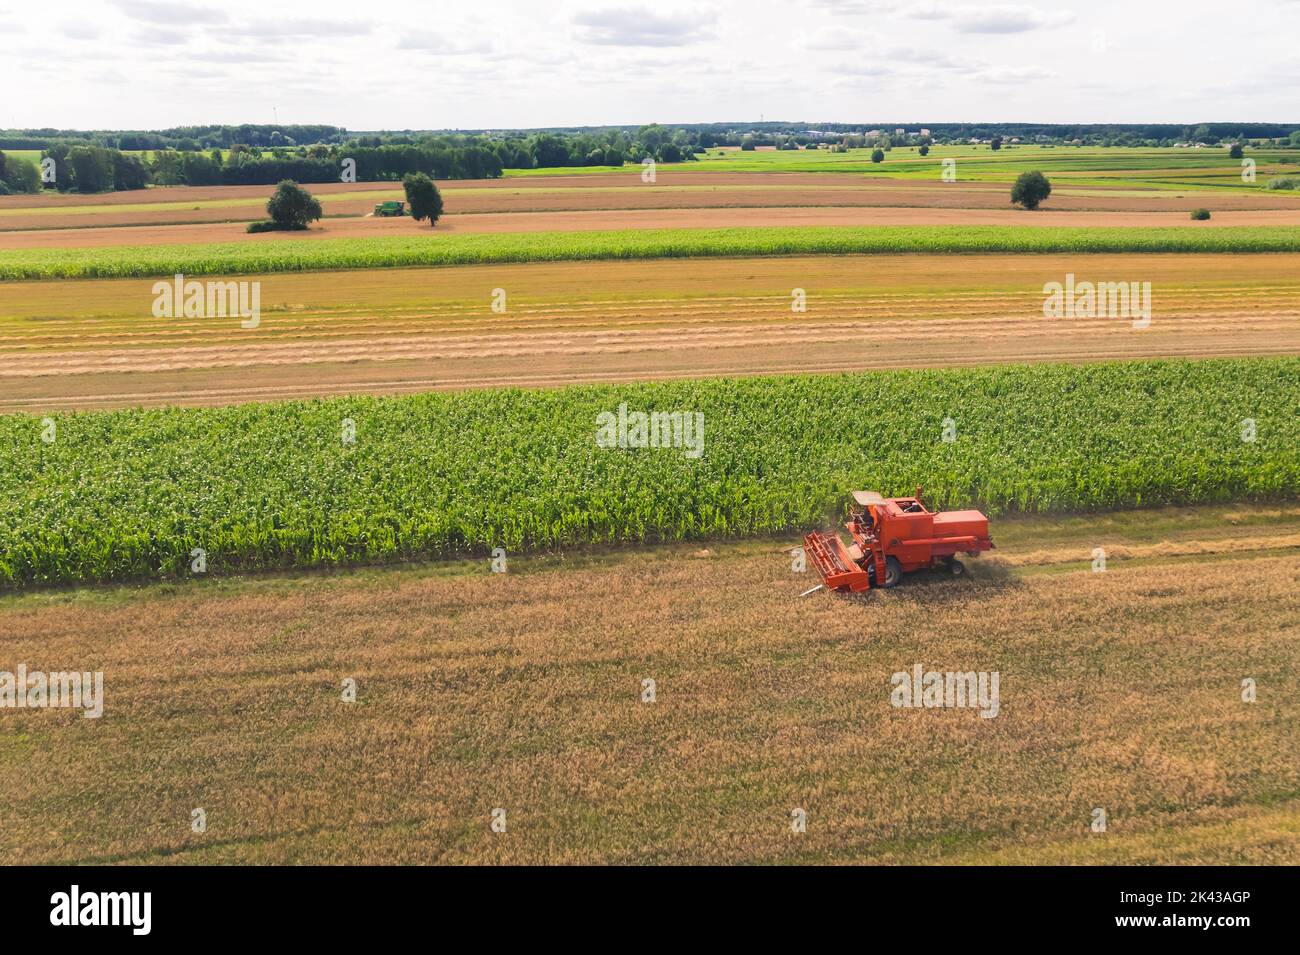 Bird's eye perspective of agricultural field full of green crops. One red farm machine - combine harvester - working on rapeseed crops. High quality photo Stock Photo